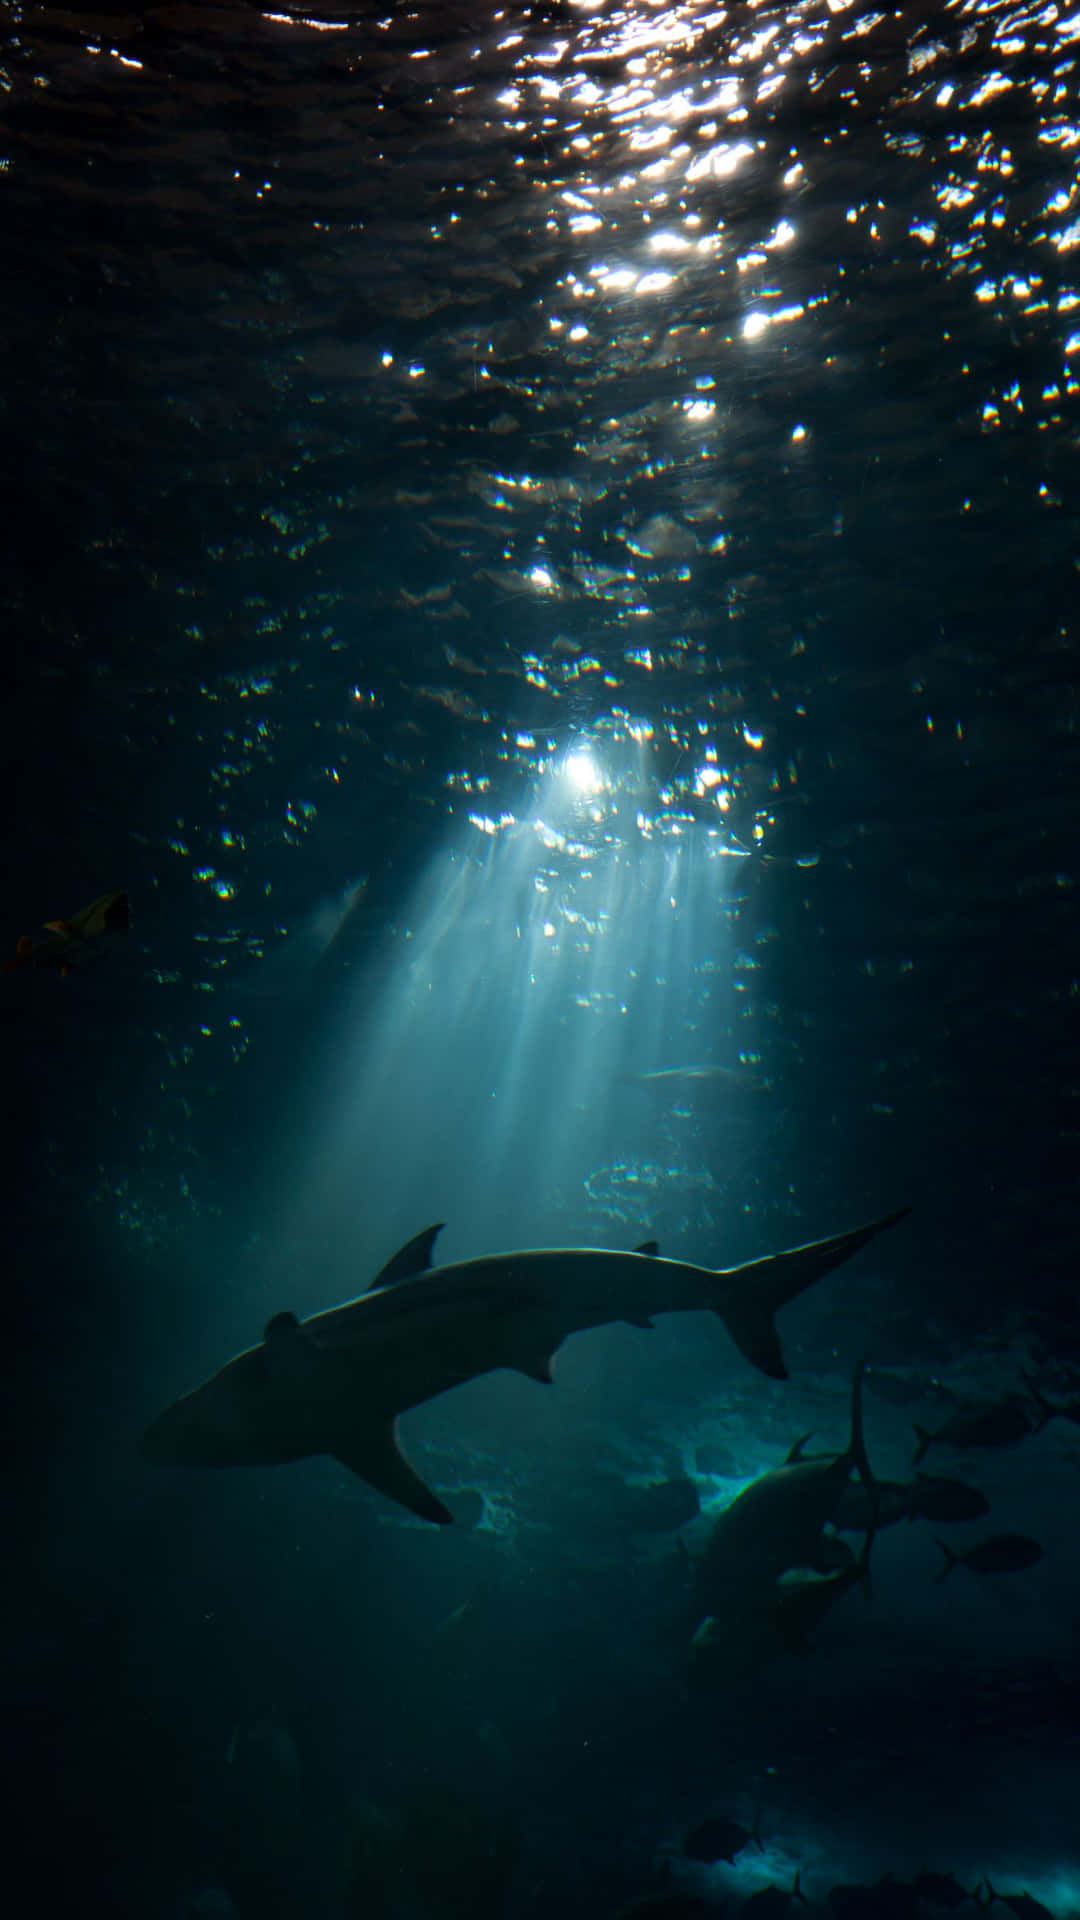 Unlock the power to see and capture your world with the undiscovered qualities of this Shark Iphone Wallpaper